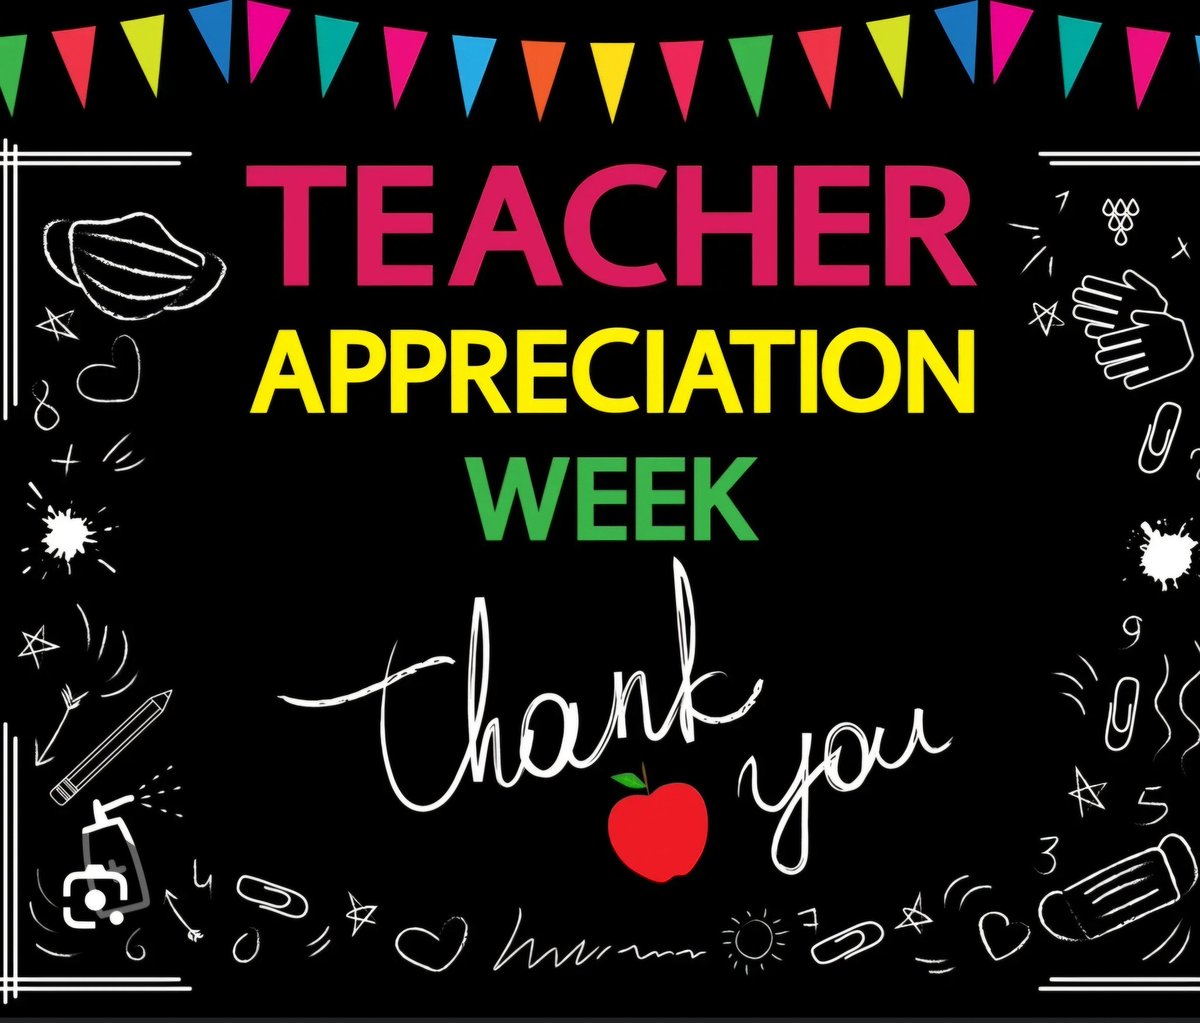 A huge THANK YOU to our incredible @CardiffColts teachers who have worked tirelessly for students all year! They are amazing people and educators! @cjhpta